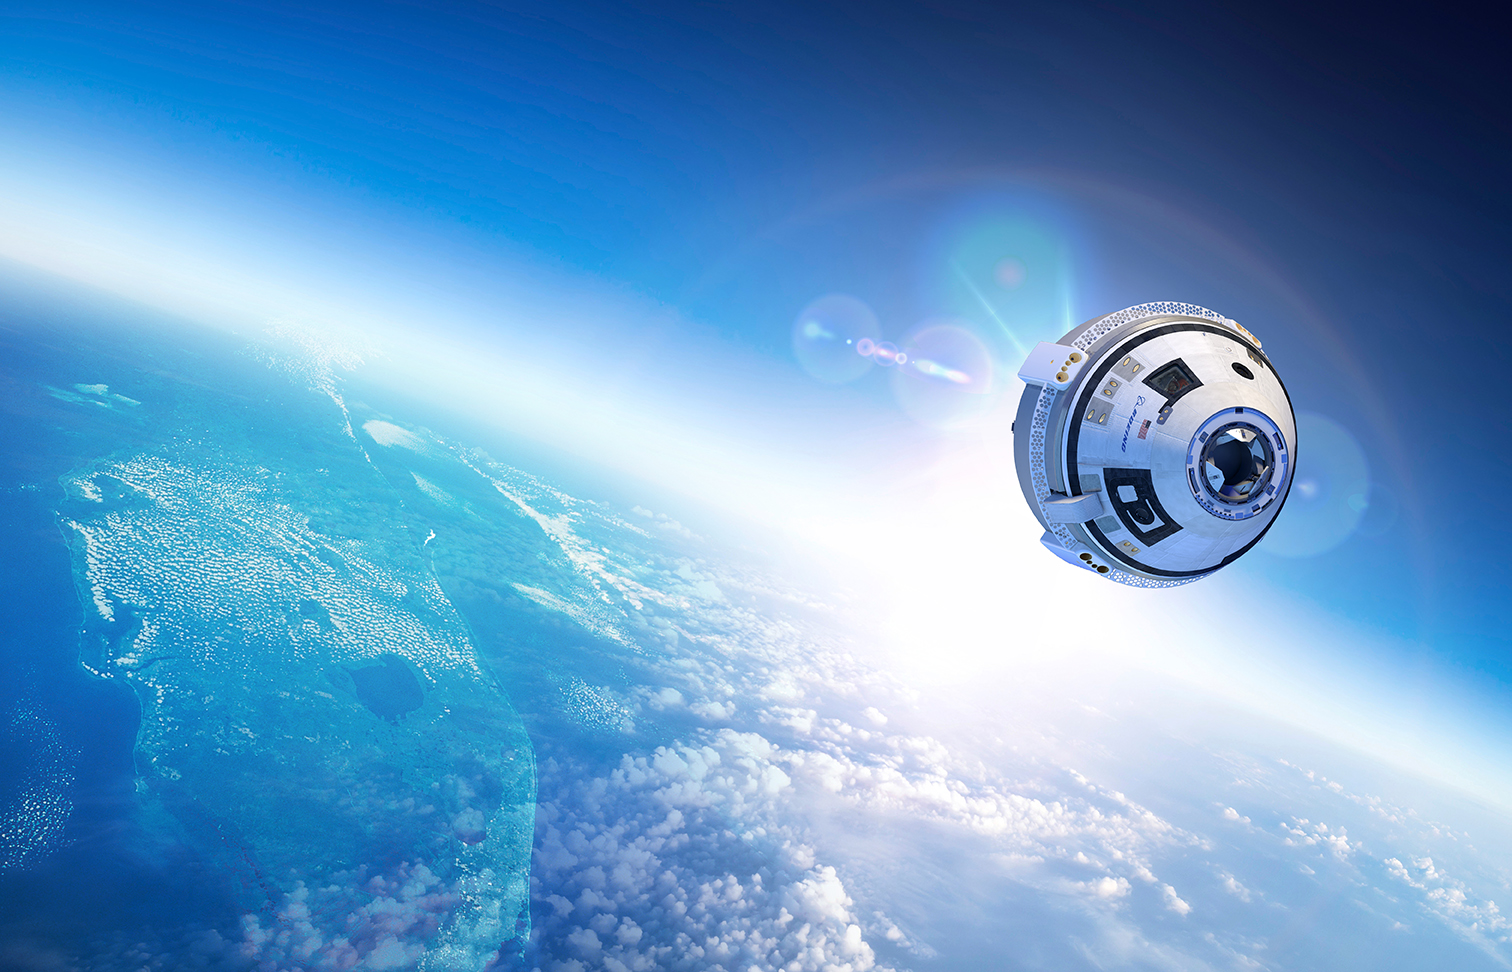 Boeing Starliner Crewed Space Flights Will Be Pushed Back From 2017 to 2018